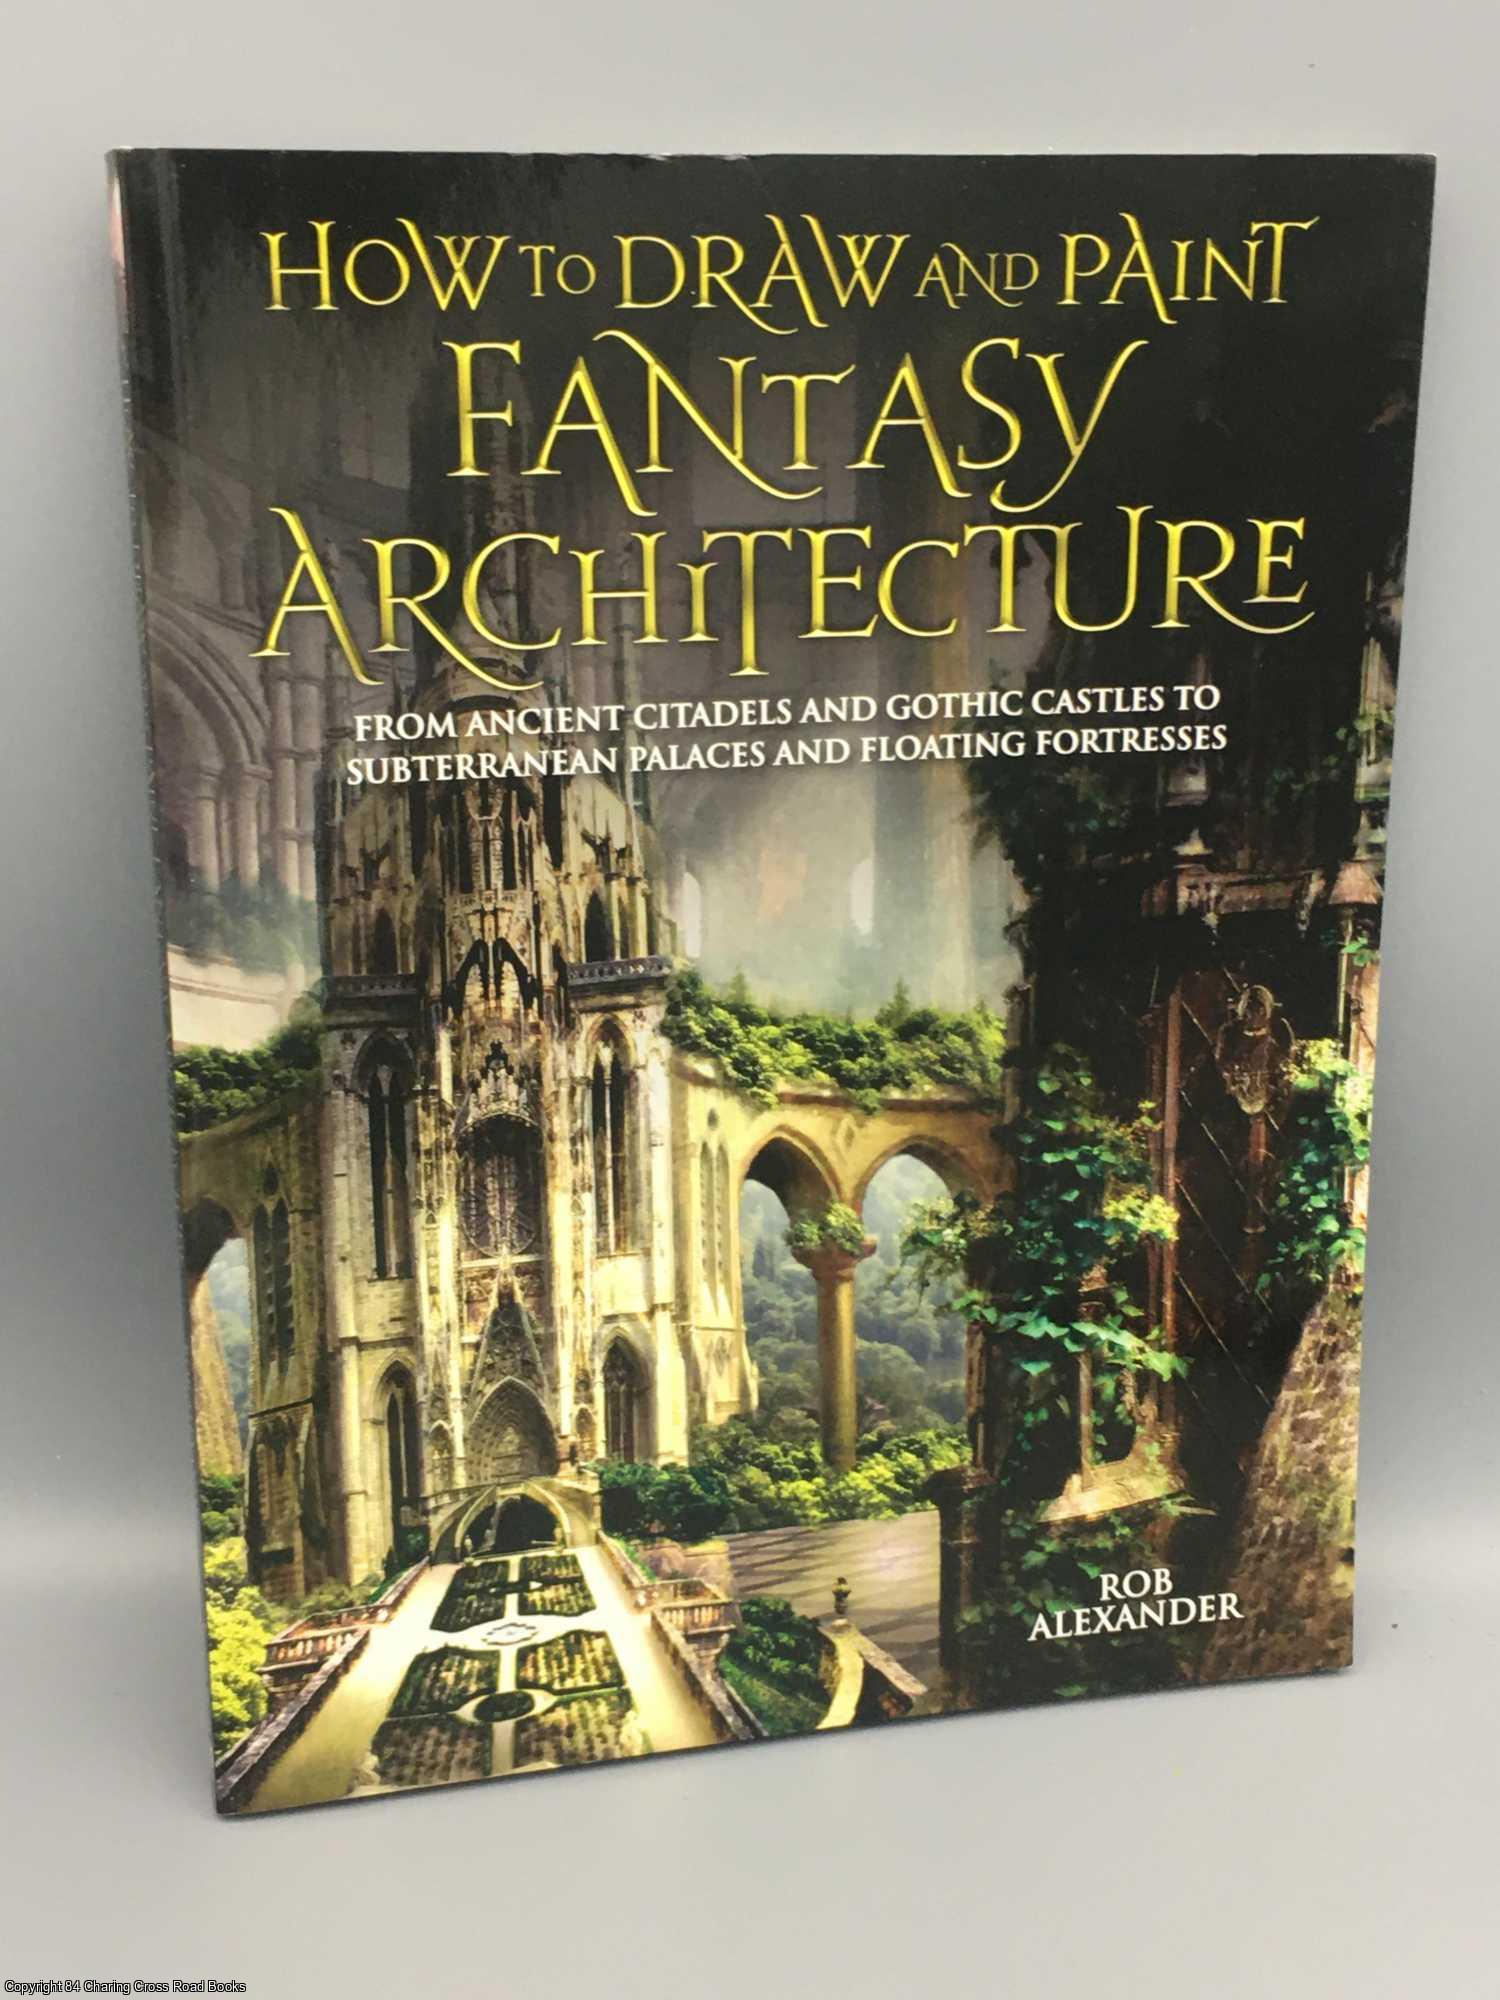 Alexander, Rob - How to Draw and Paint Fantasy Architecture